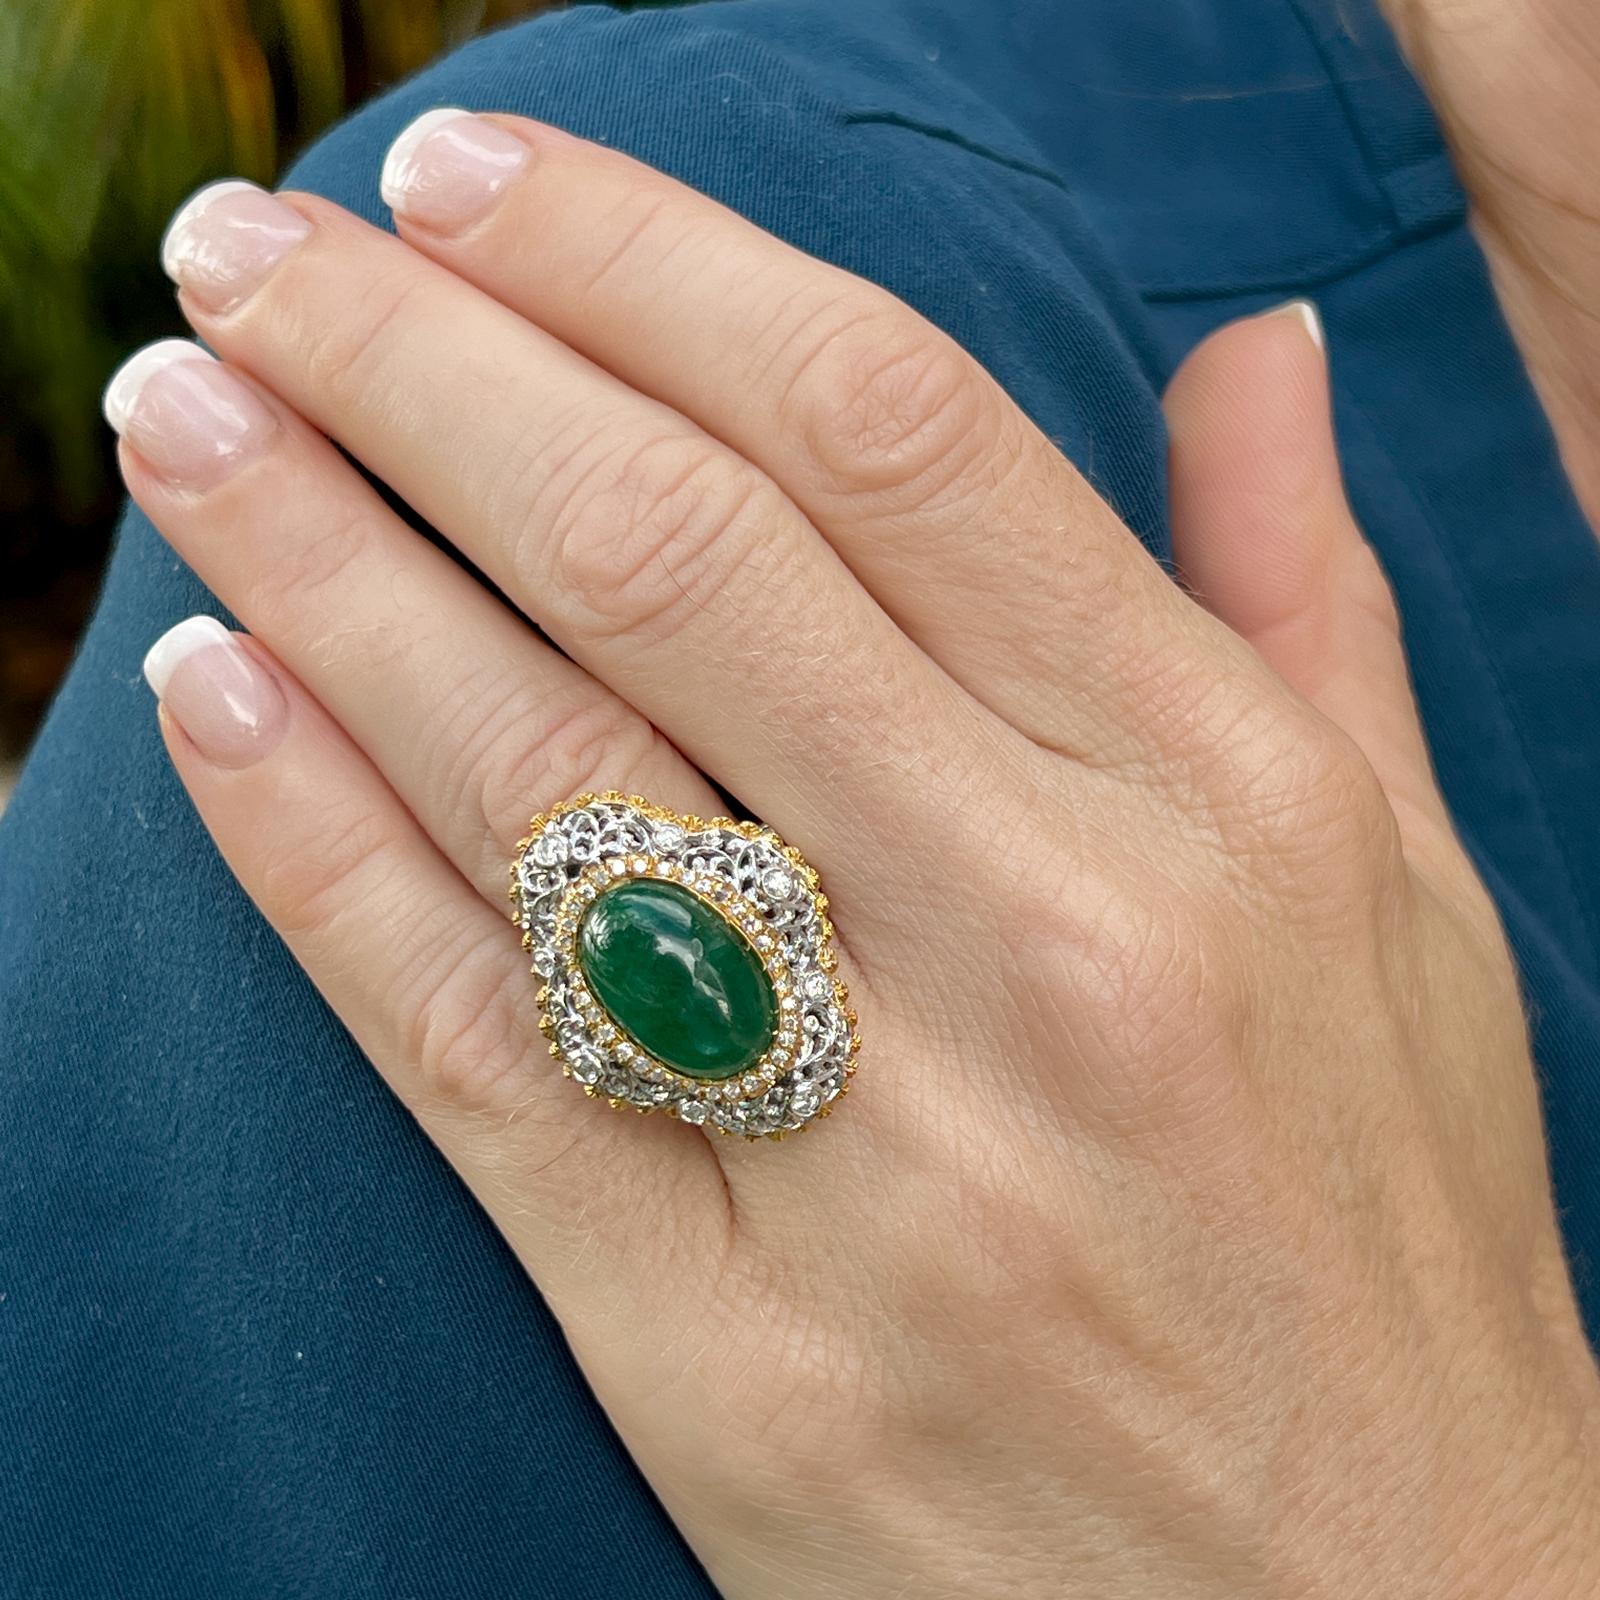 Stunning emerald diamond cocktail ring crafted in 18 karat yellow and white gold. The ring features an oval cabochon bright green emerald weighing approximately 8.00 carats. The natural emerald is set with surrounding prong and bezel set diamonds